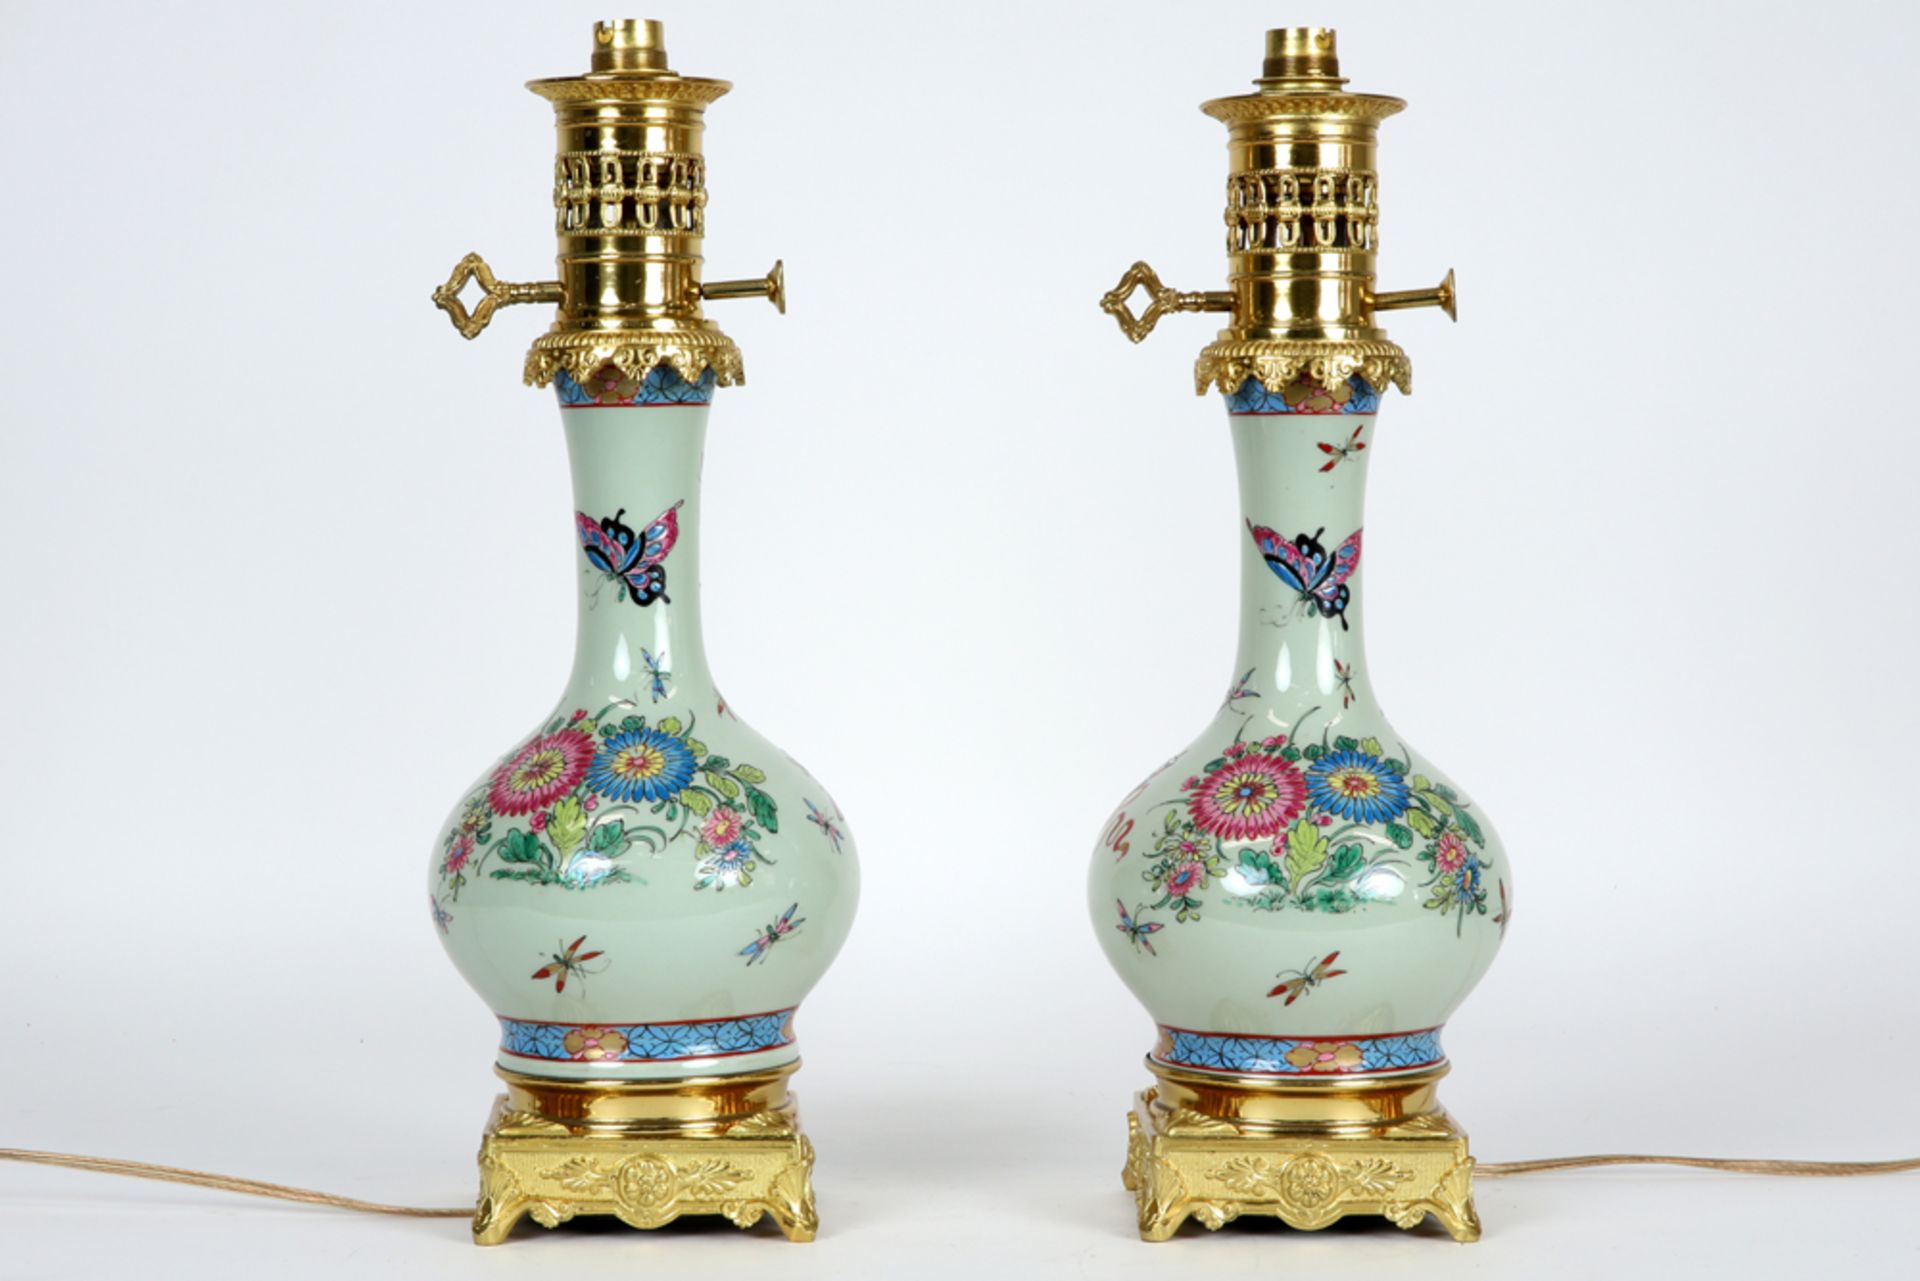 pair of lamps made of antique paraffin lamps in porcelain and gilded metal || Paar lampen gemaakt